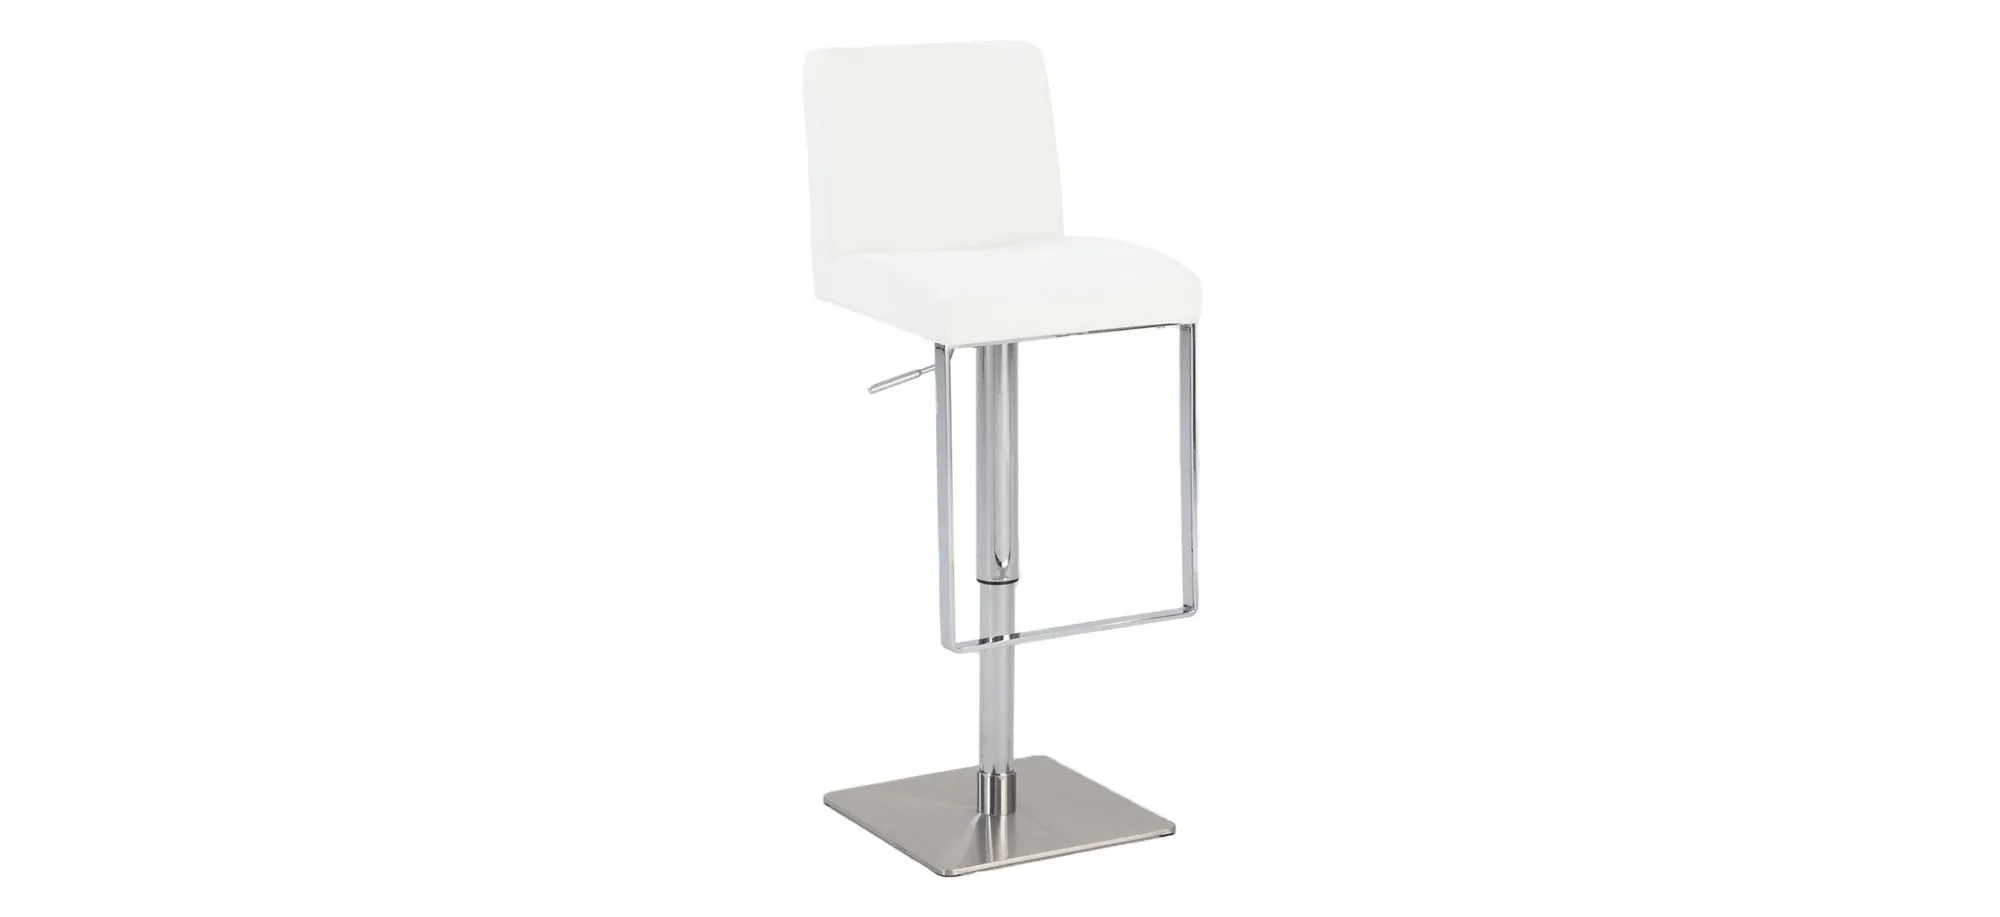 Hopewell Adjustable Swivel Stool in White by Chintaly Imports